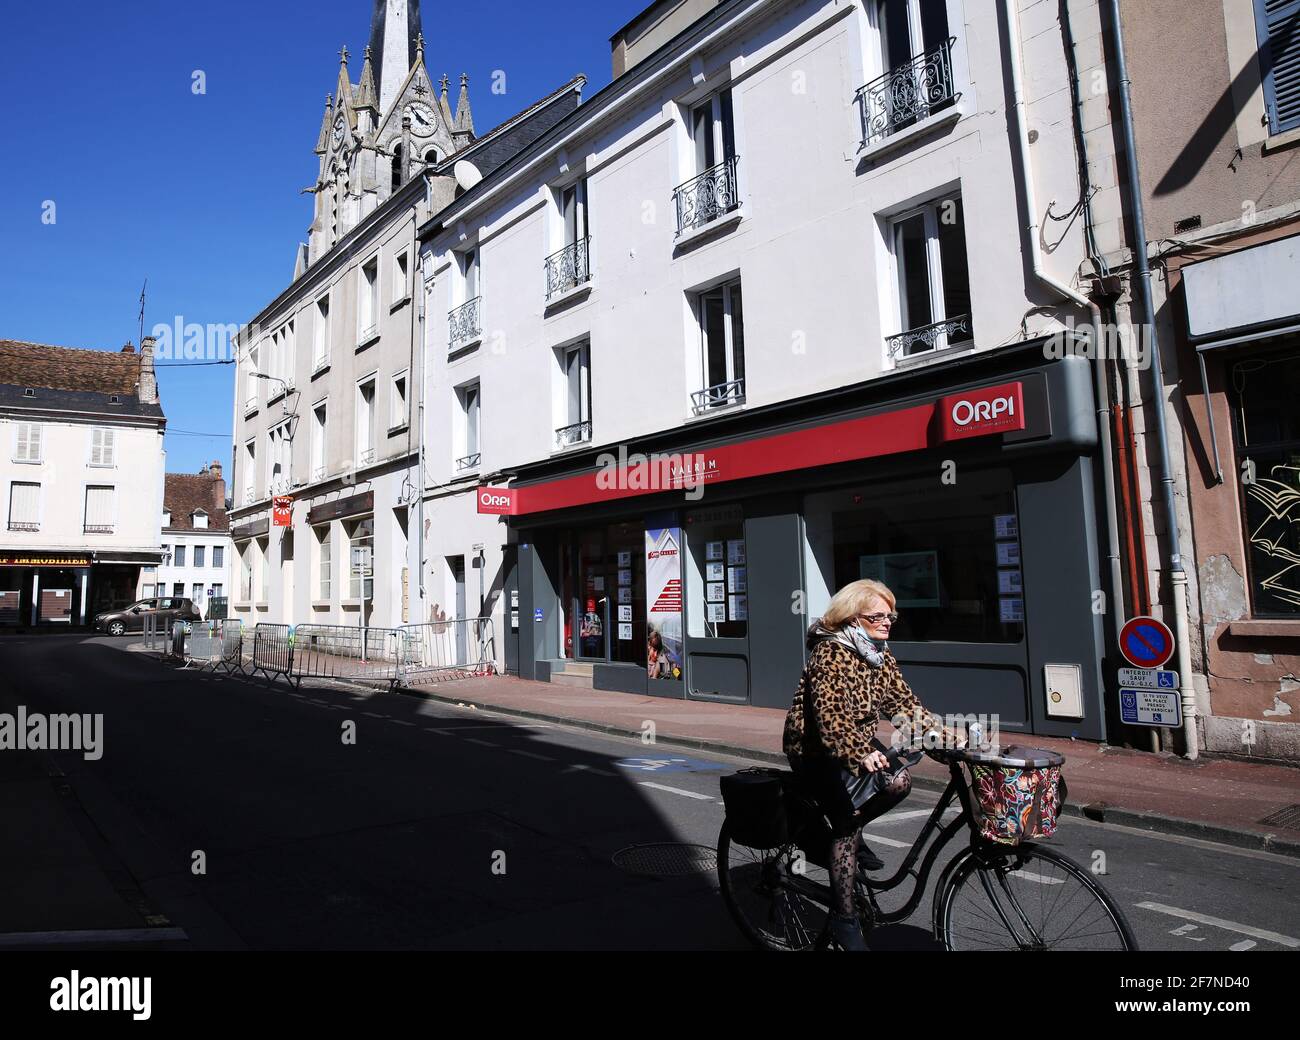 Montargis, France. 8th Apr, 2021. A woman rides a bicycle in Montargis, central France, on April 8, 2021. More than 10 million people have received a first COVID-19 vaccine dose in France, Prime Minister Jean Castex announced on Thursday, pledging to quickly expand the vaccination rollout. Credit: Gao Jing/Xinhua/Alamy Live News Stock Photo